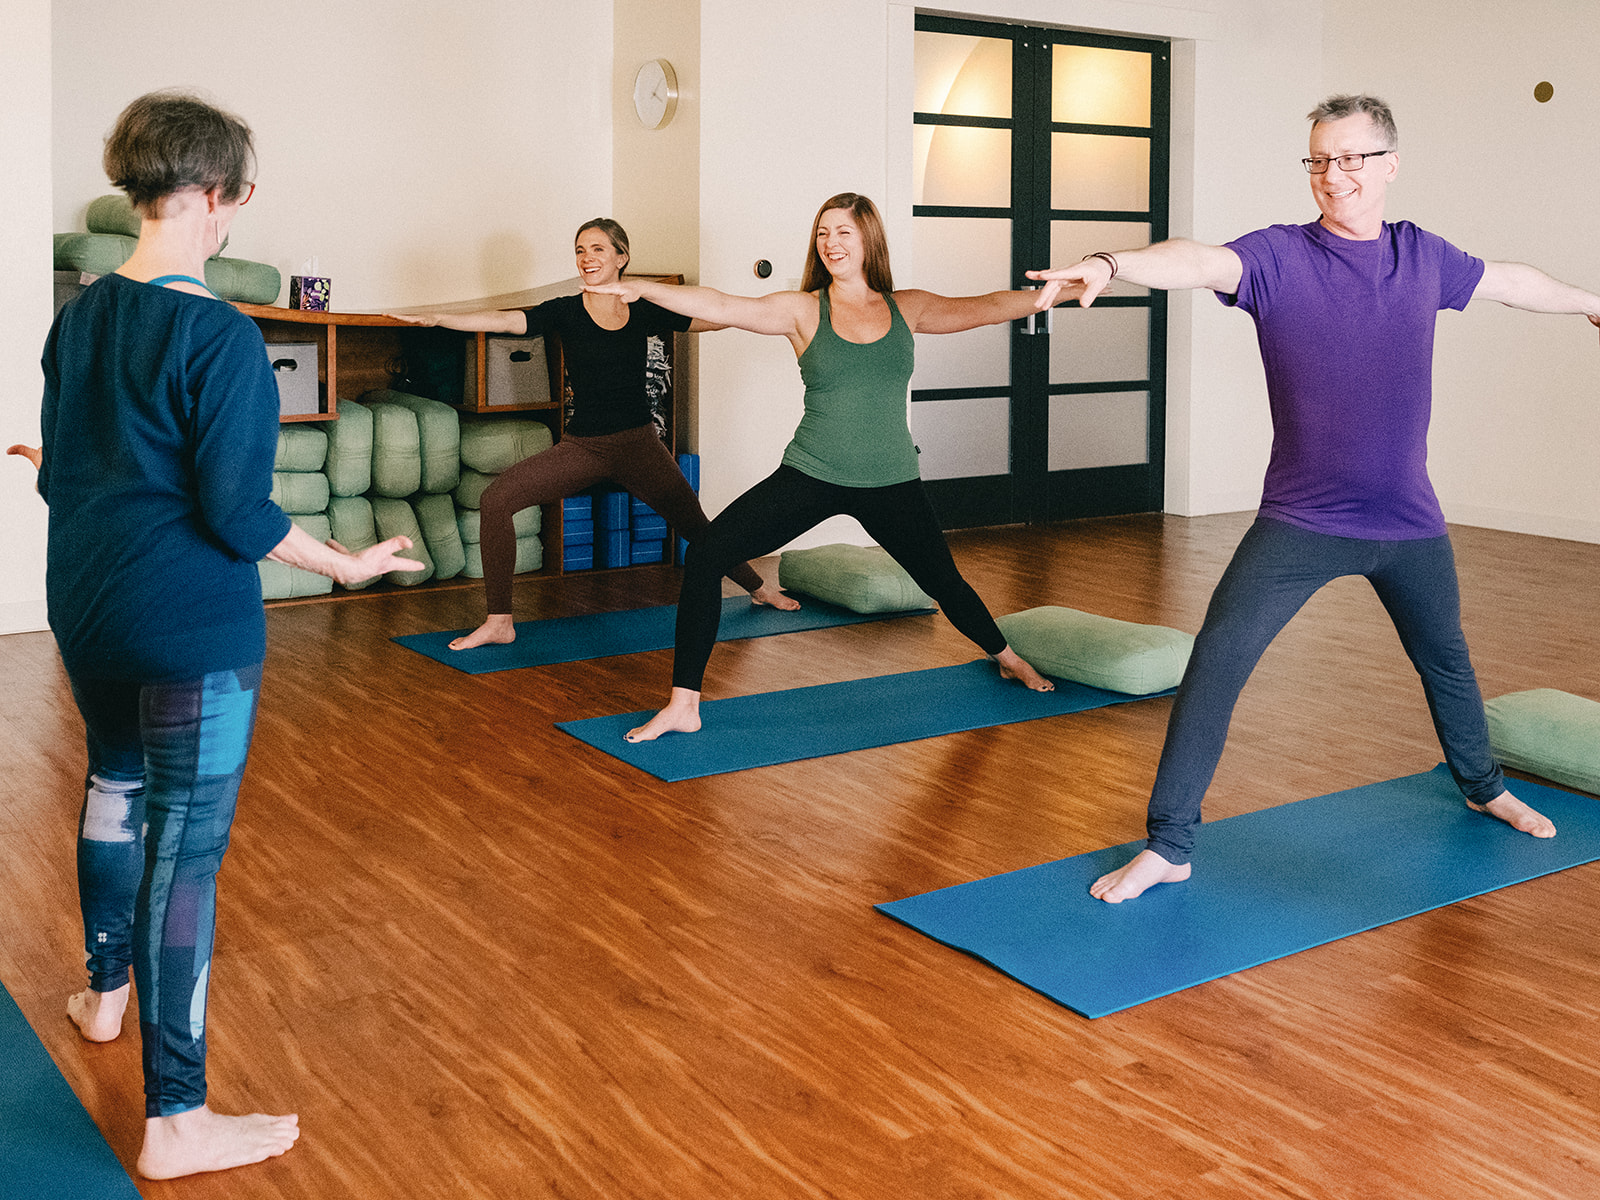 Carrboro Yoga Company - a space for connection since 2004